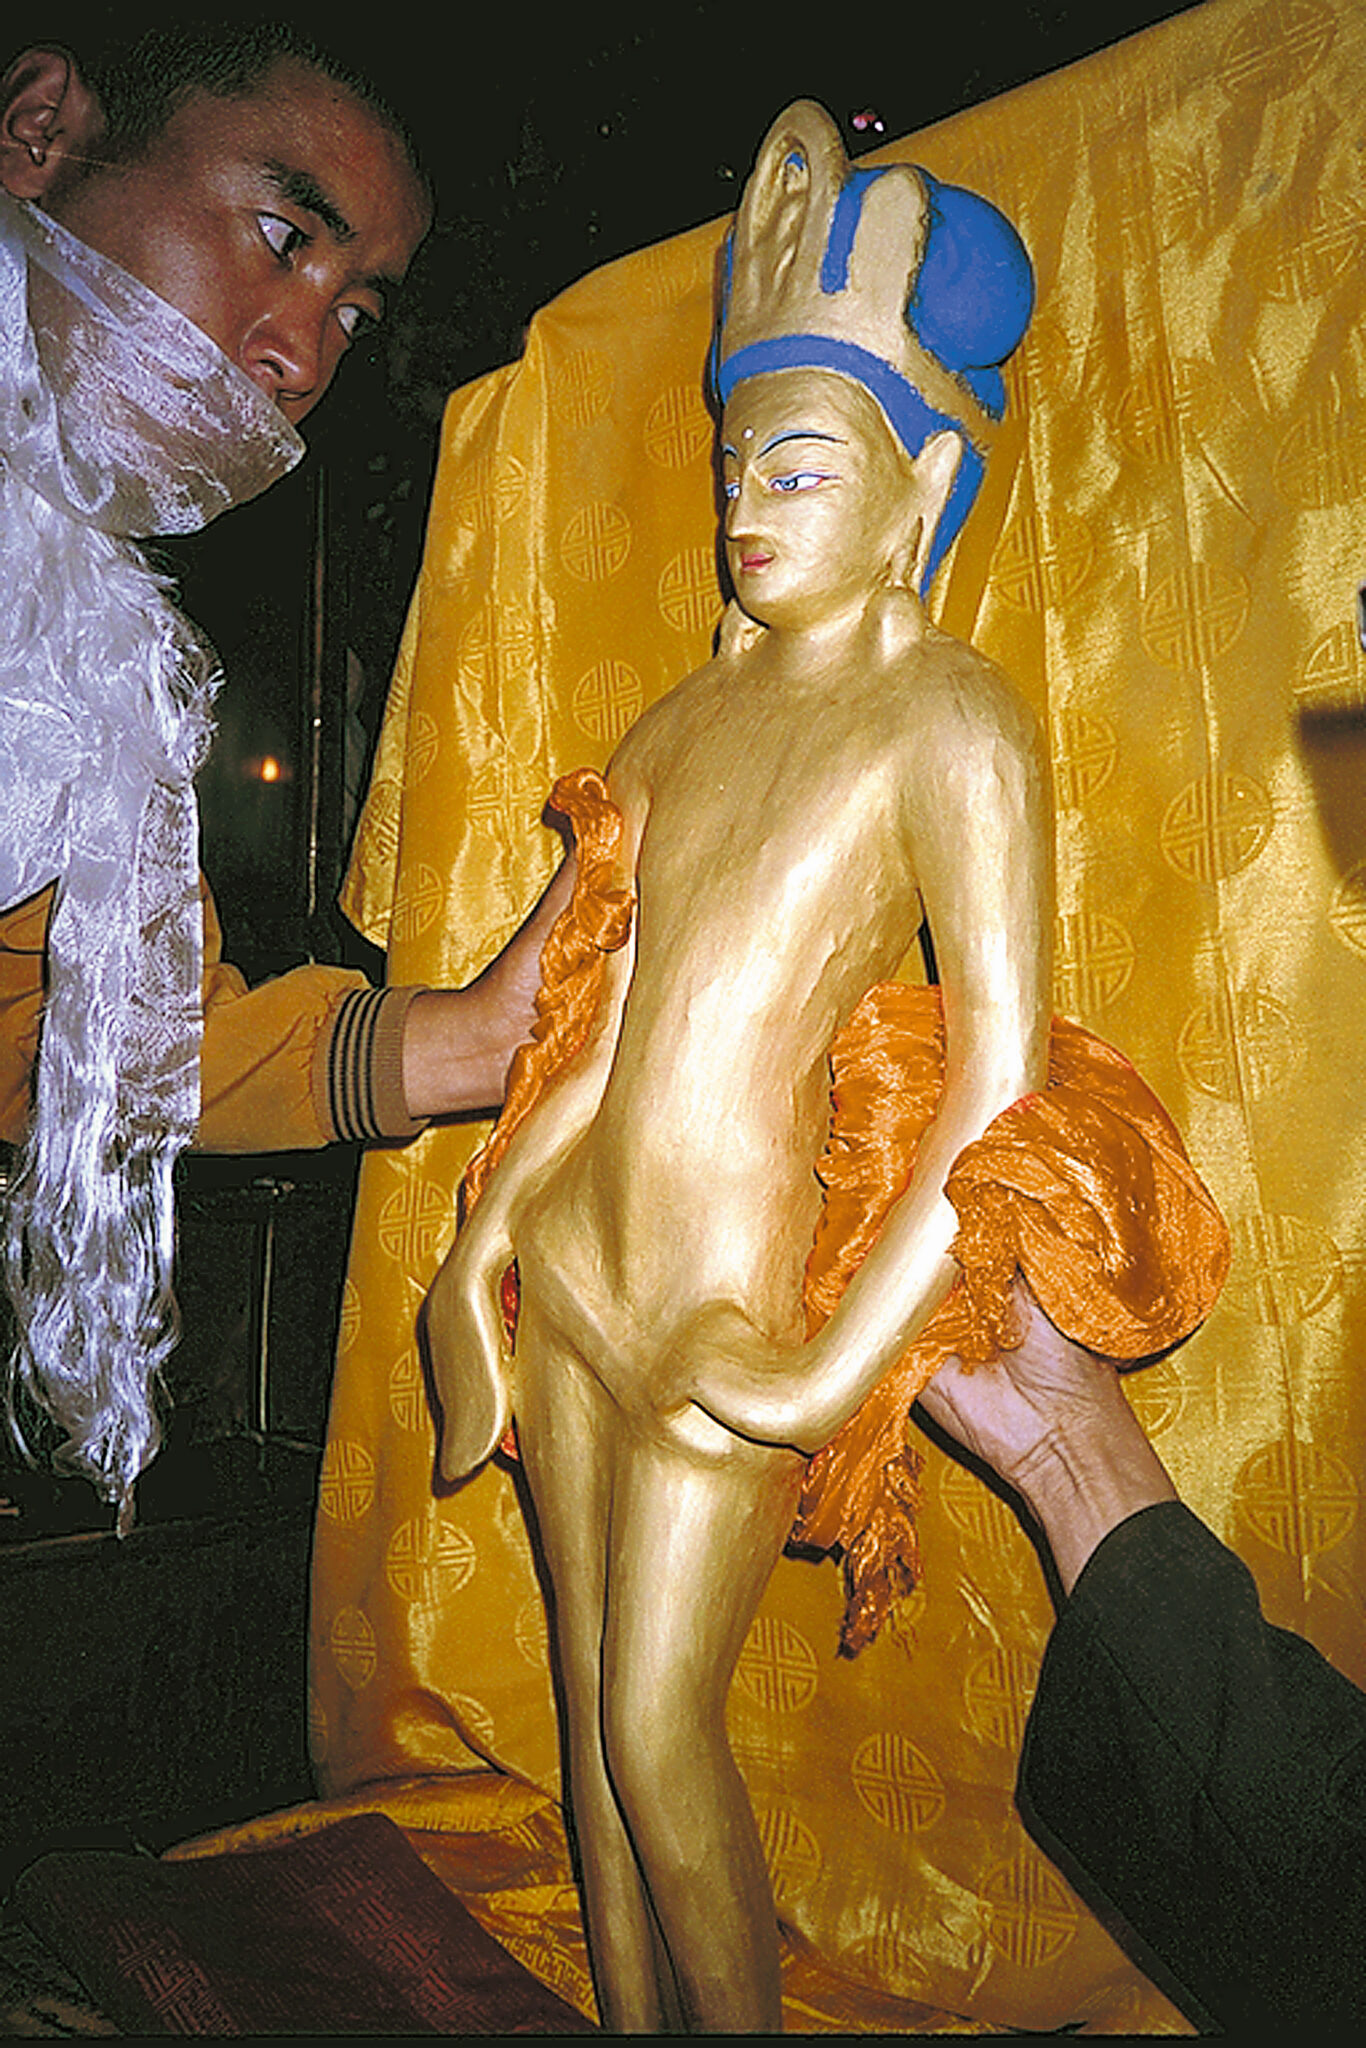 Golden statue of crowned deity with blue hair handled delicately by people with saffron-colored textiles